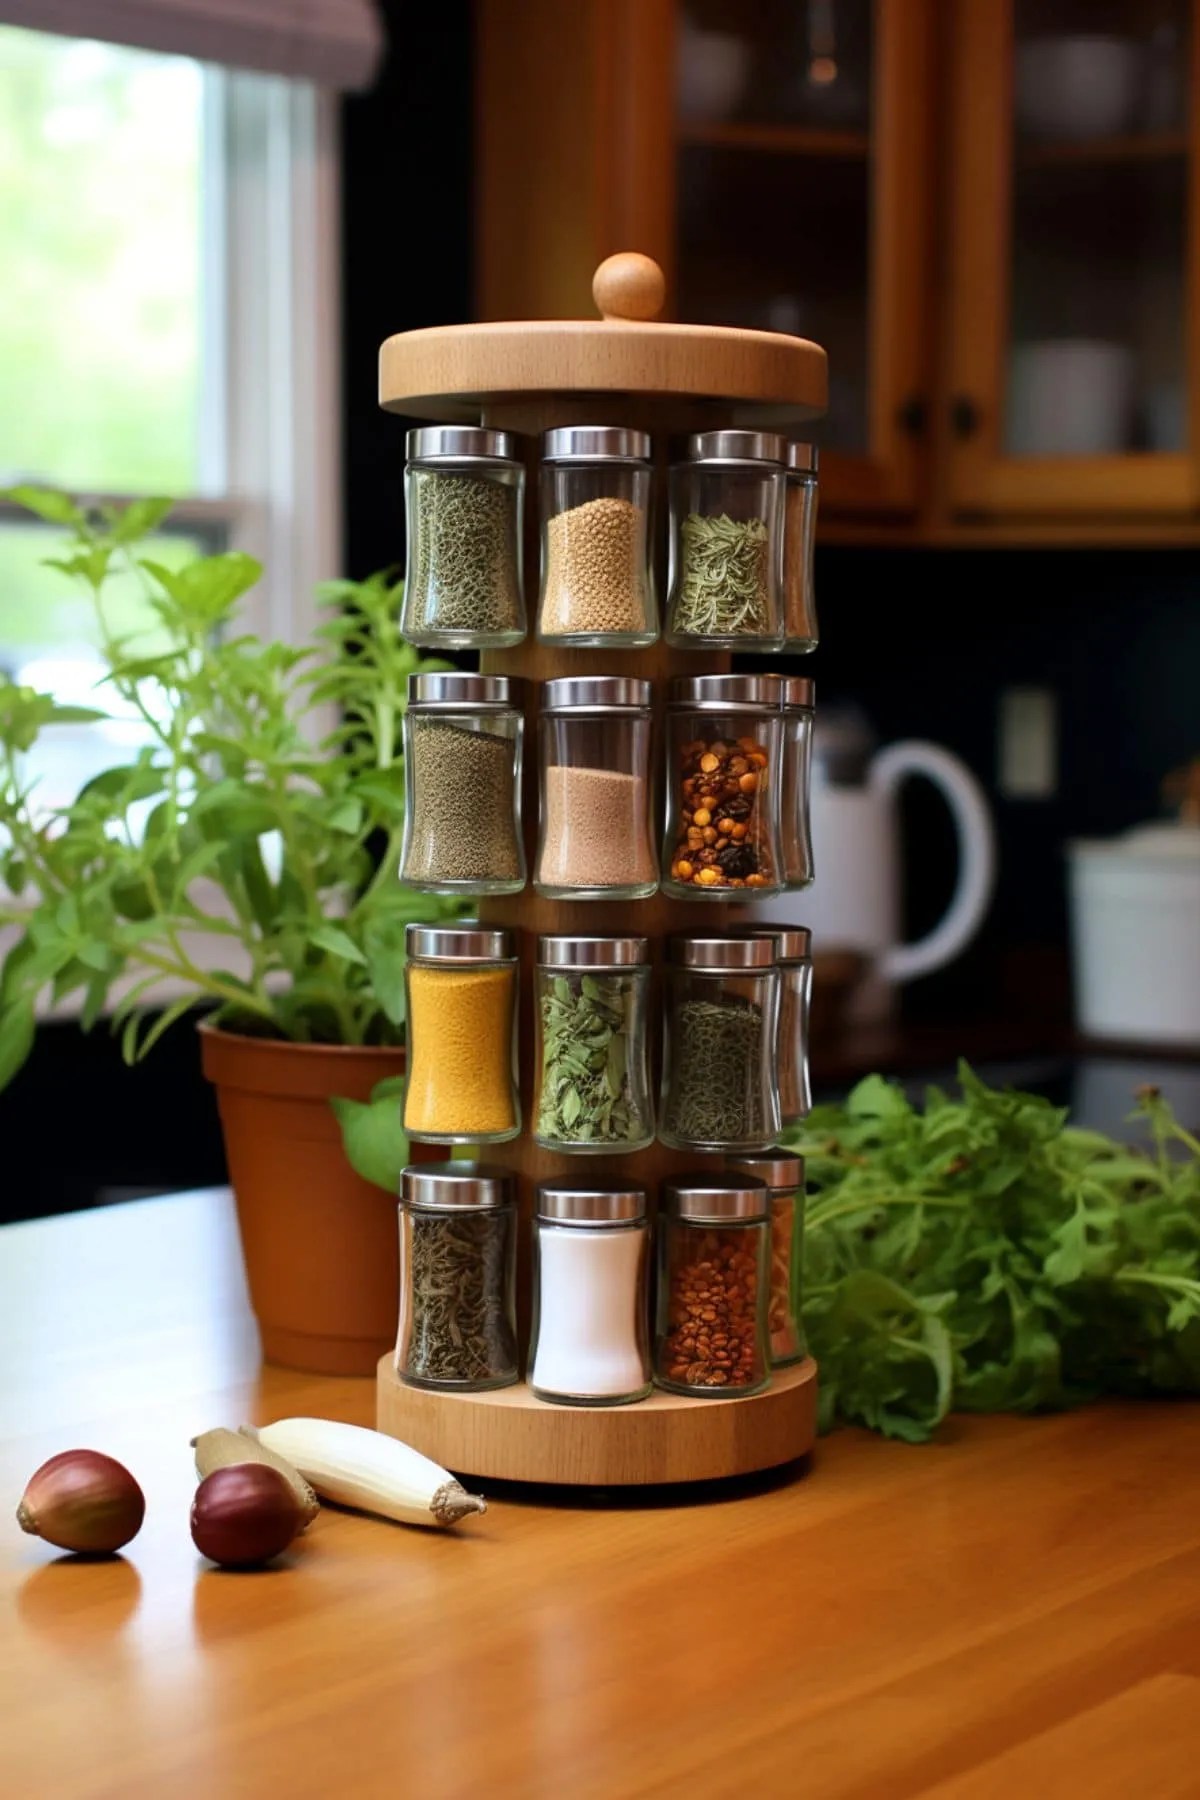 a vertical spice rack in a kitchen